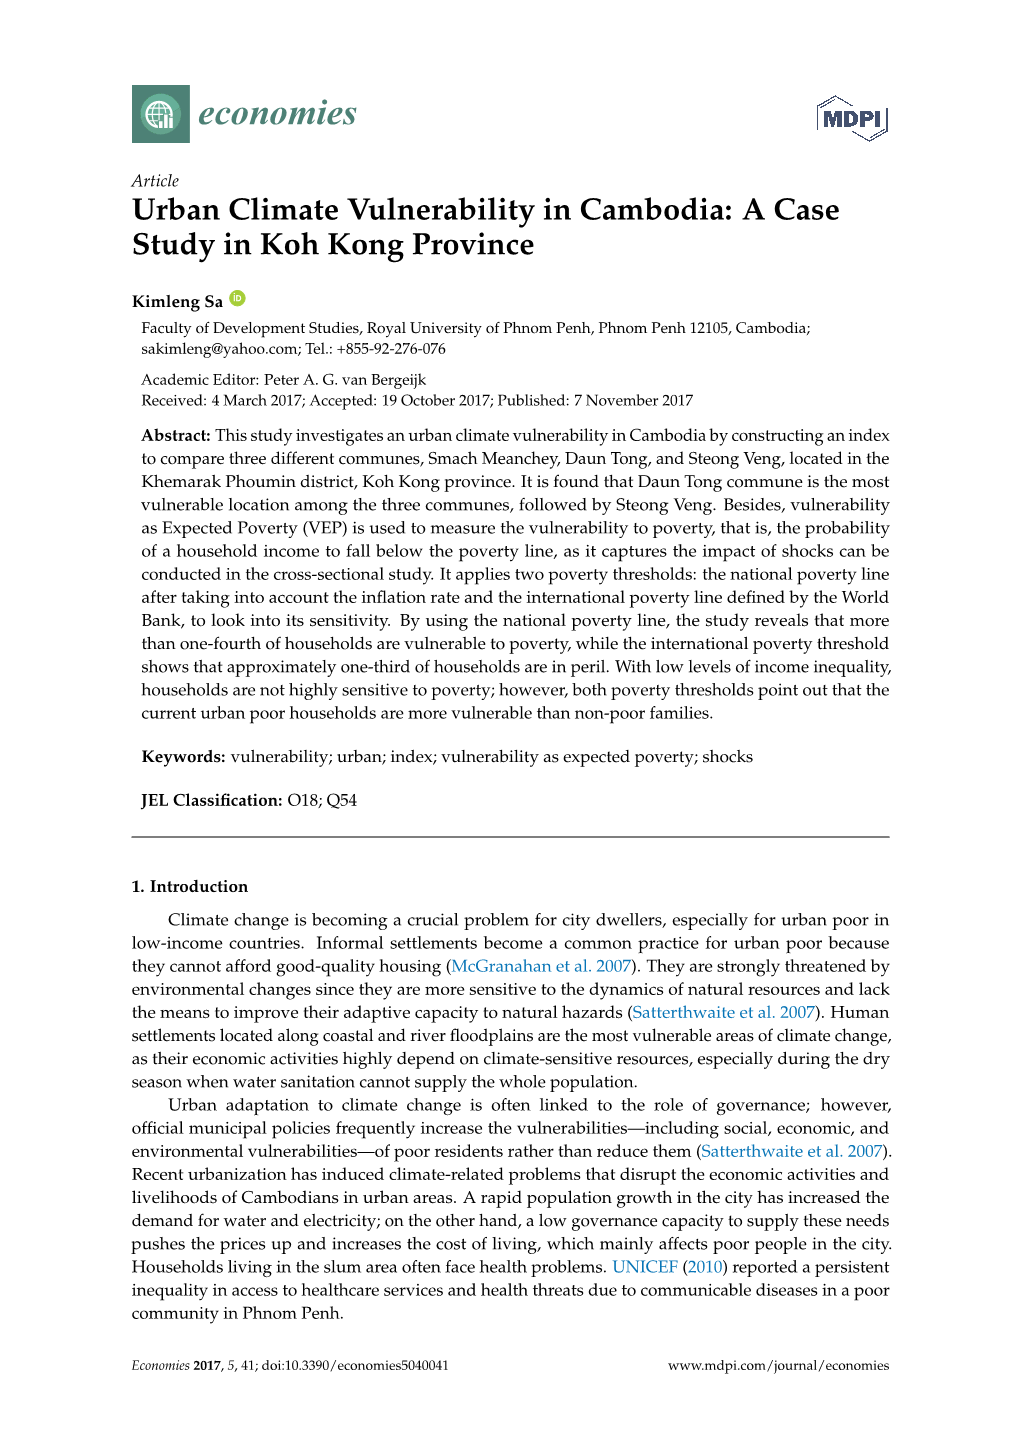 Urban Climate Vulnerability in Cambodia: a Case Study in Koh Kong Province